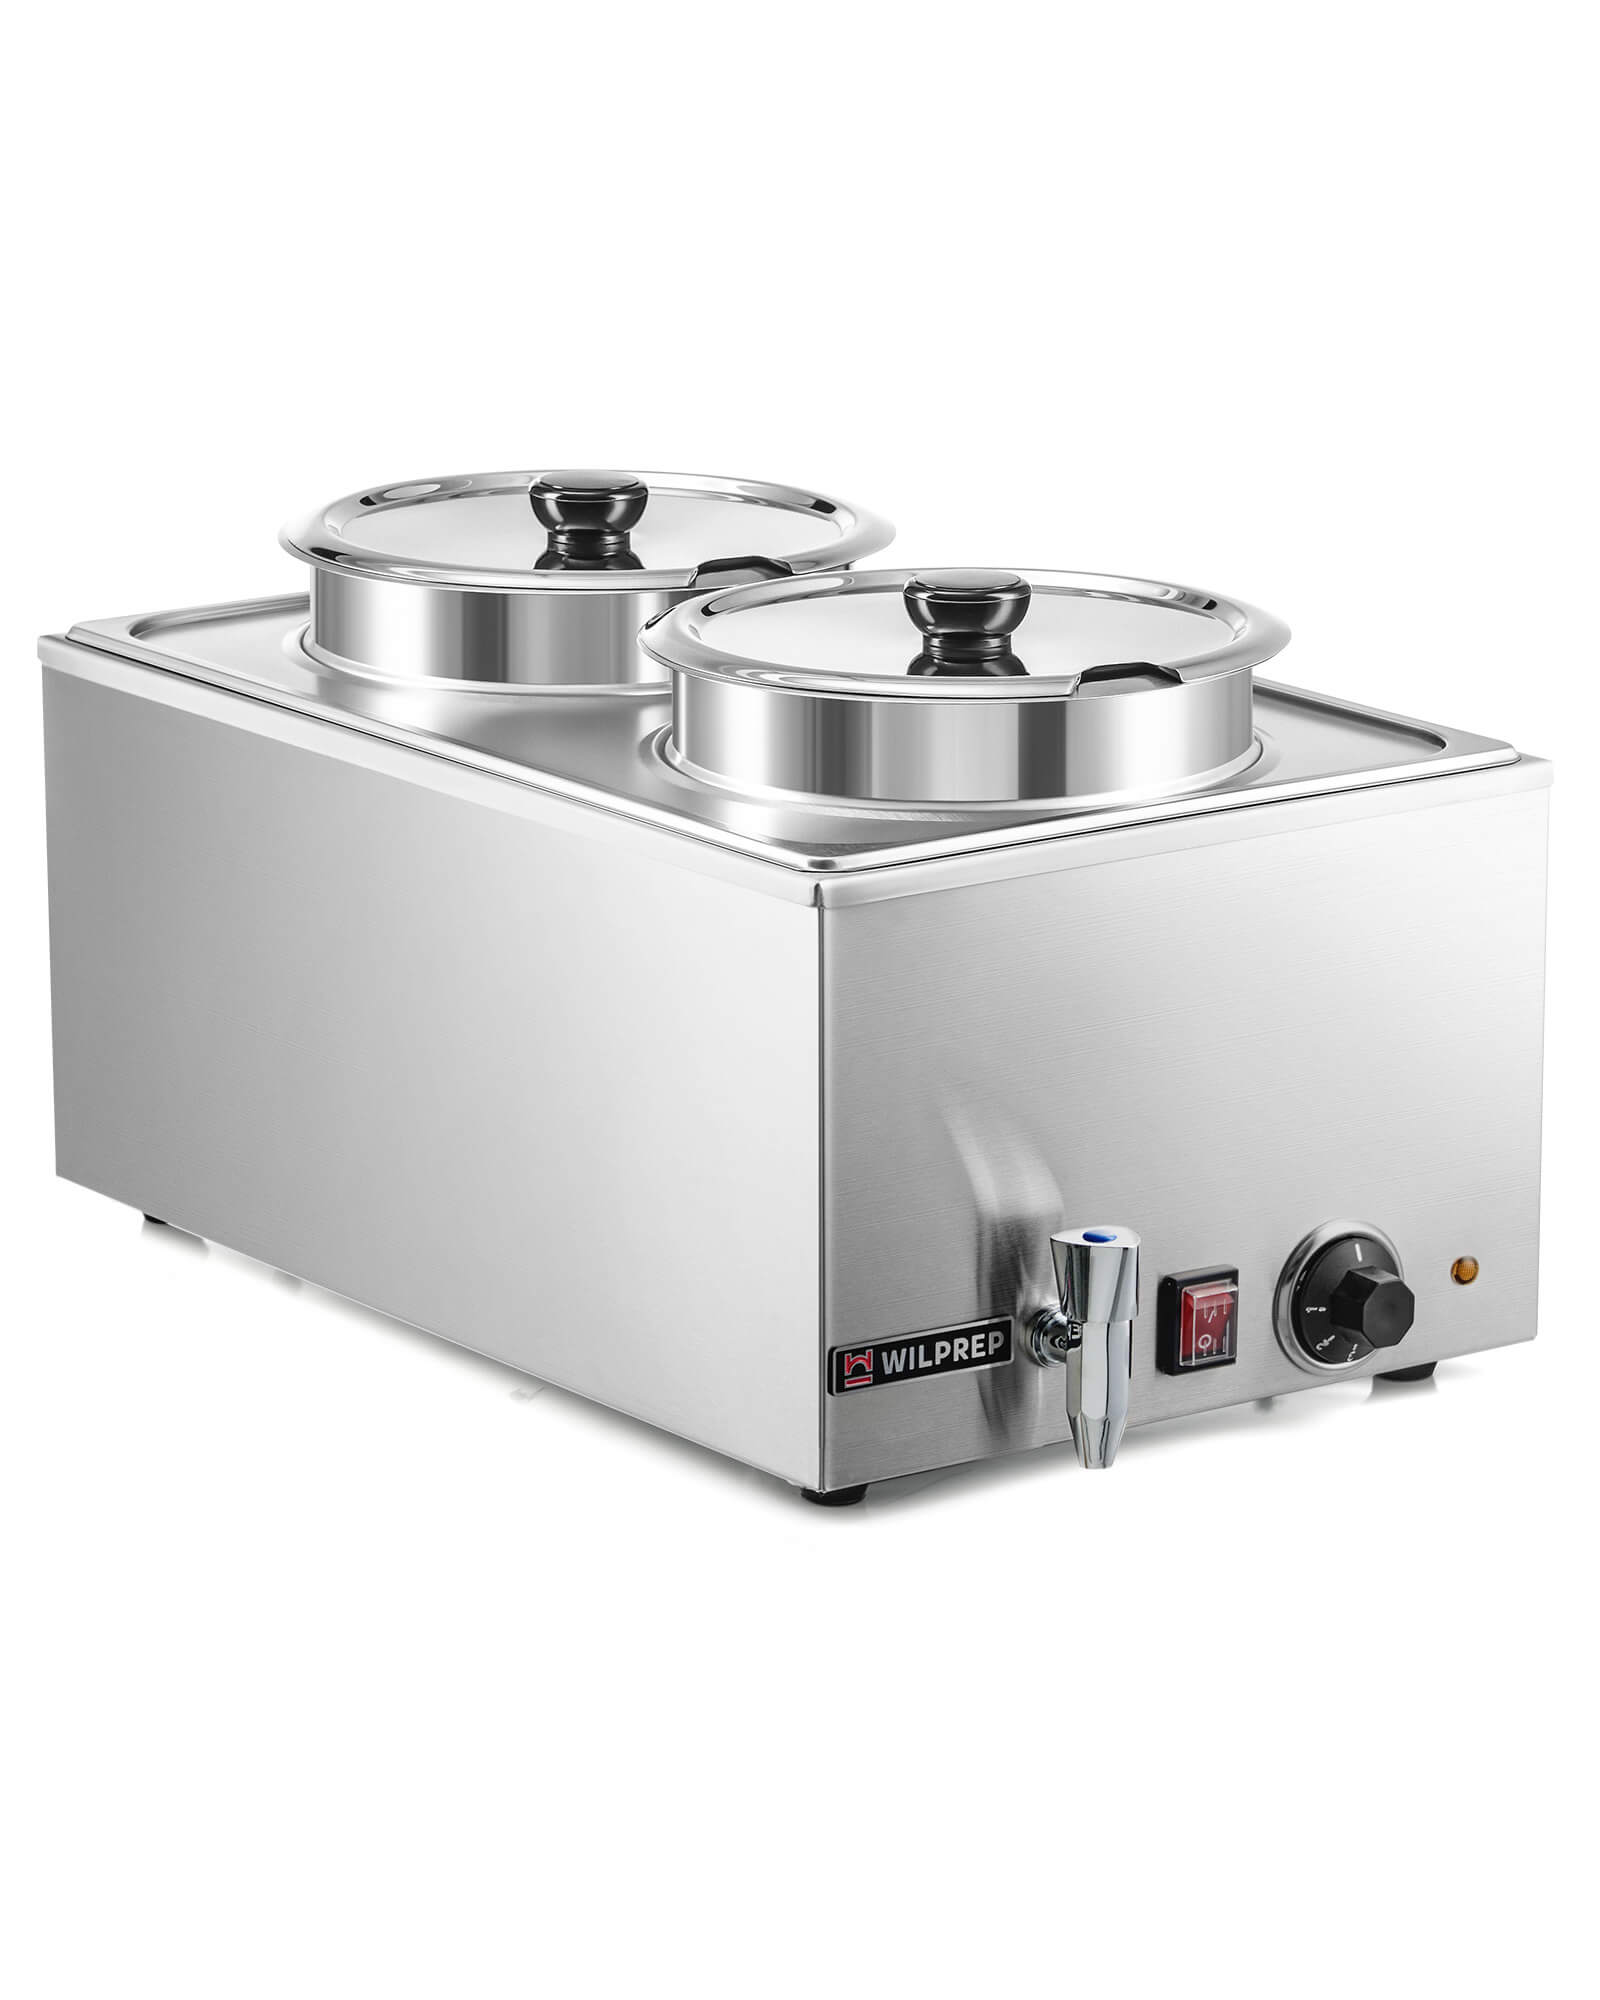 Twin Well 15 qt. Electric Countertop Food Warmer with 2 Insets & Covers with Faucet